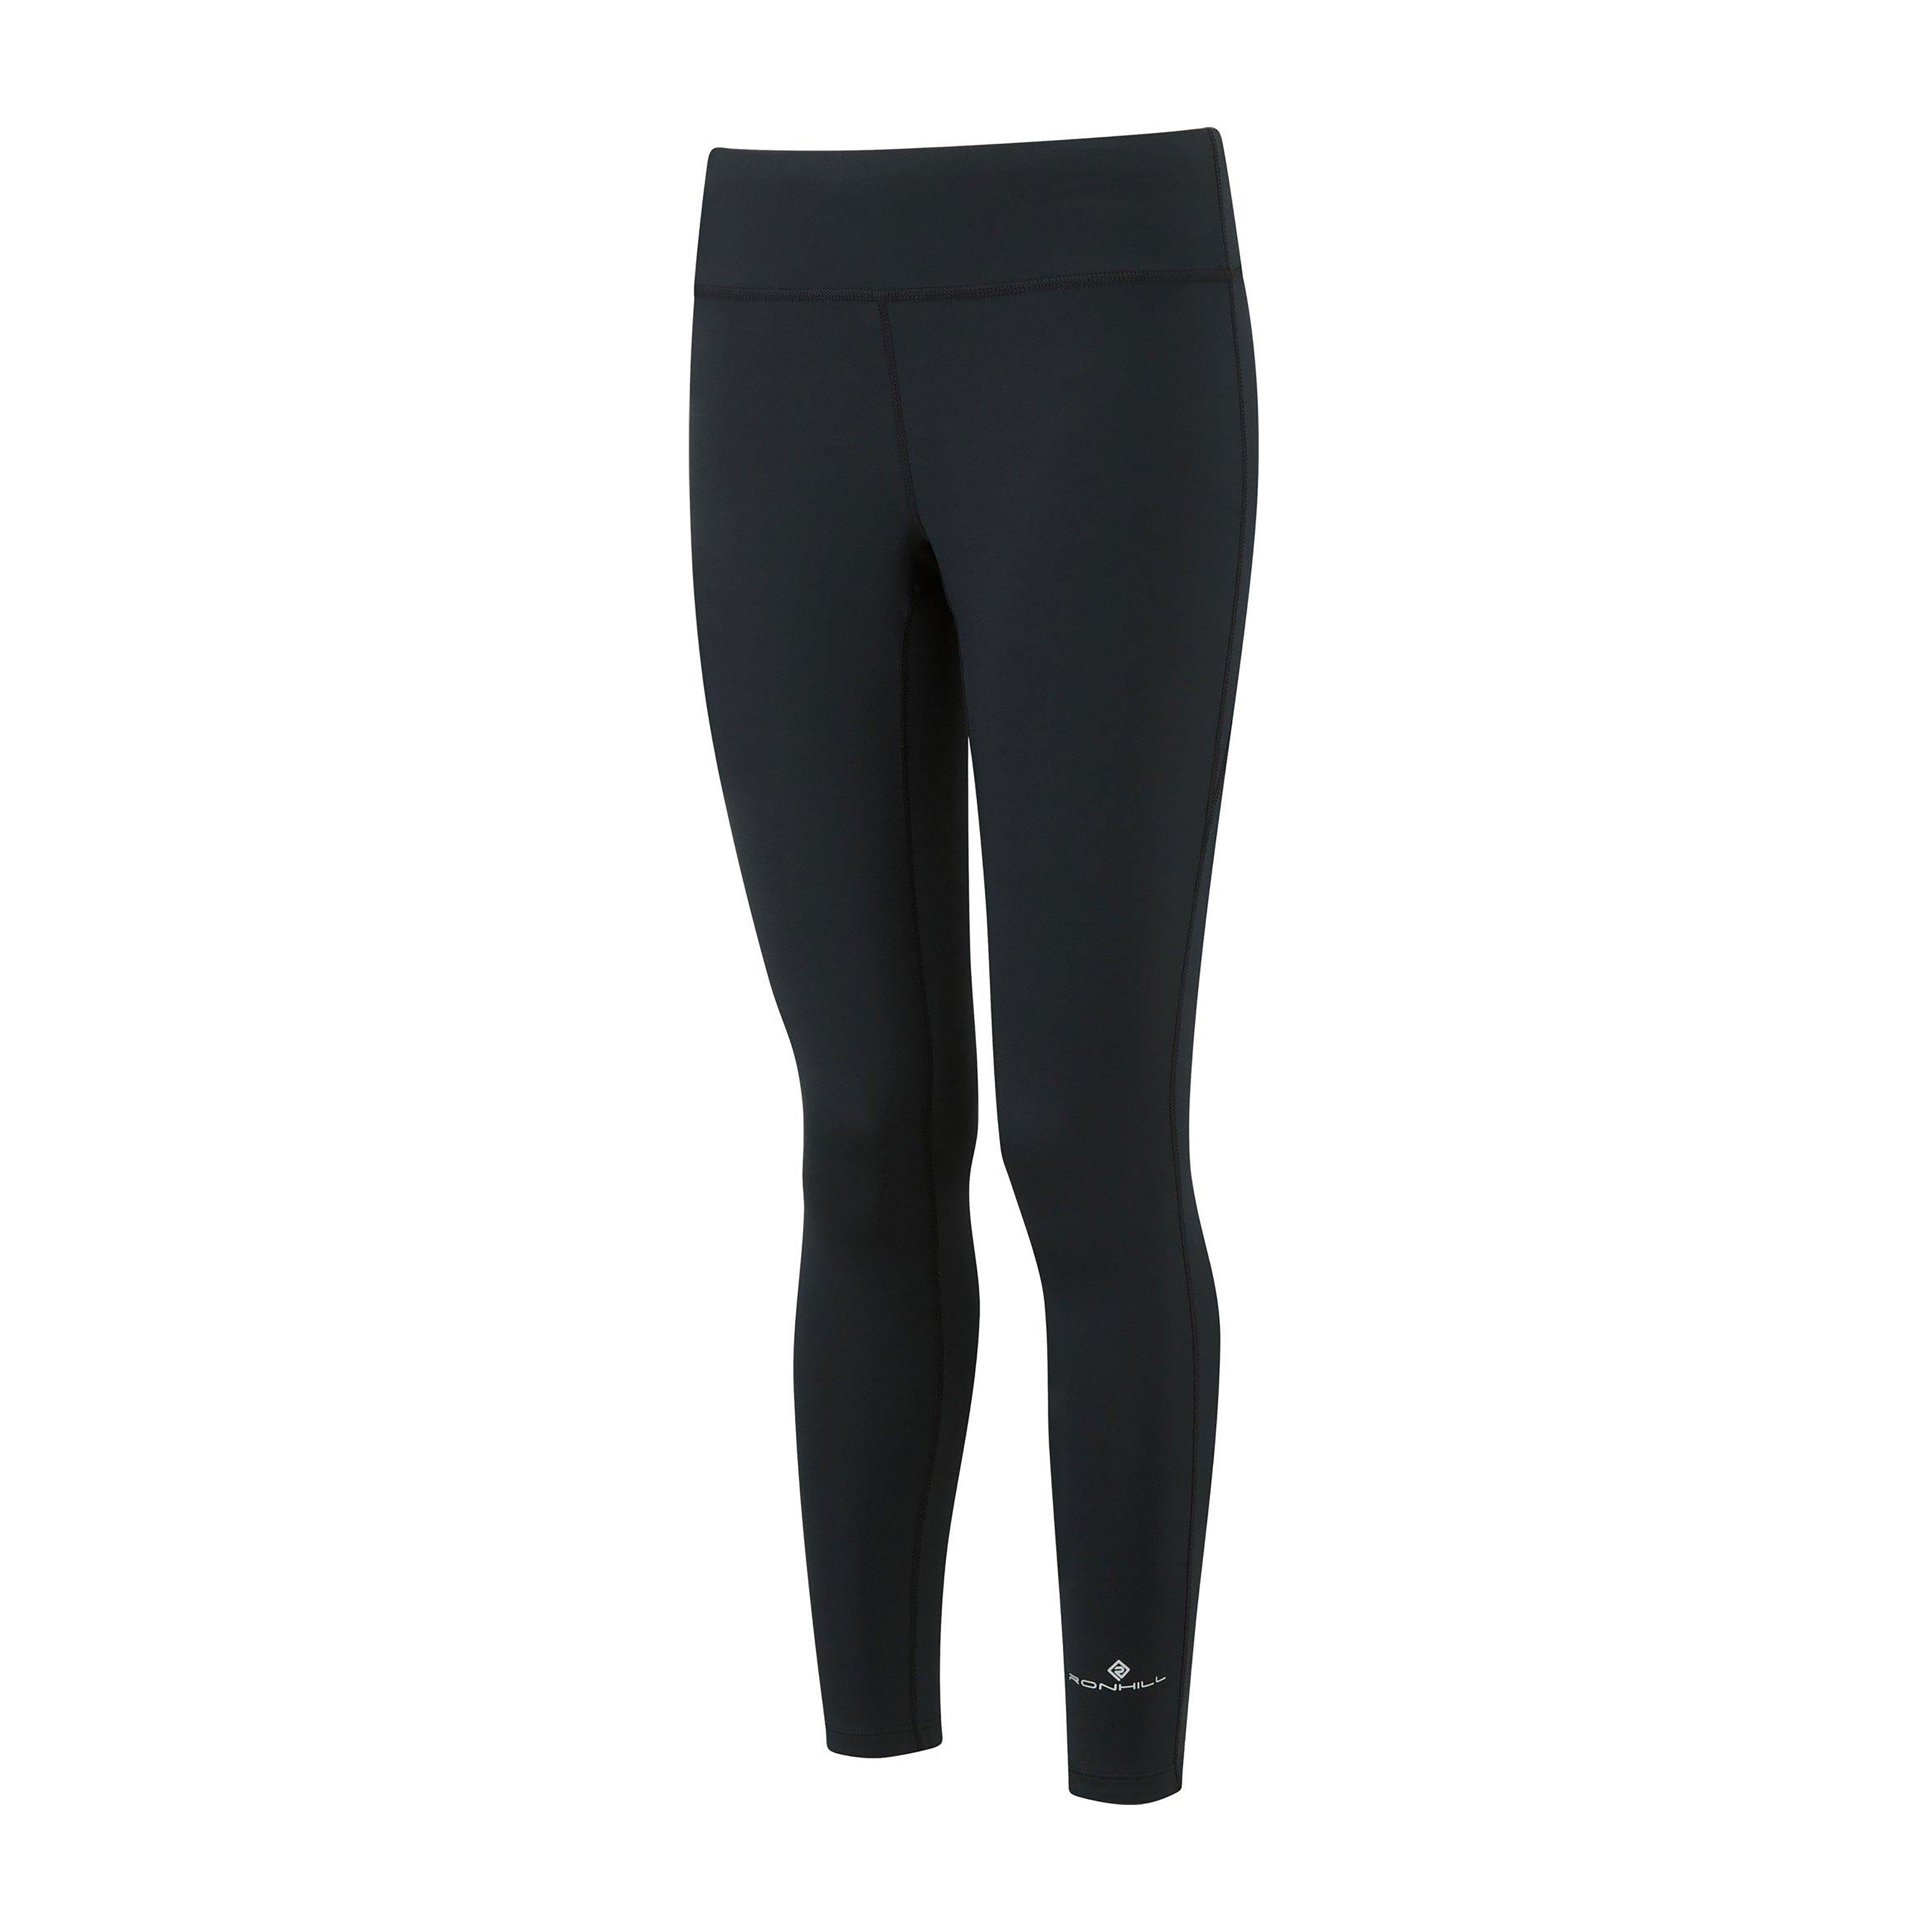 Ronhill Women's Everyday Running Tights Review